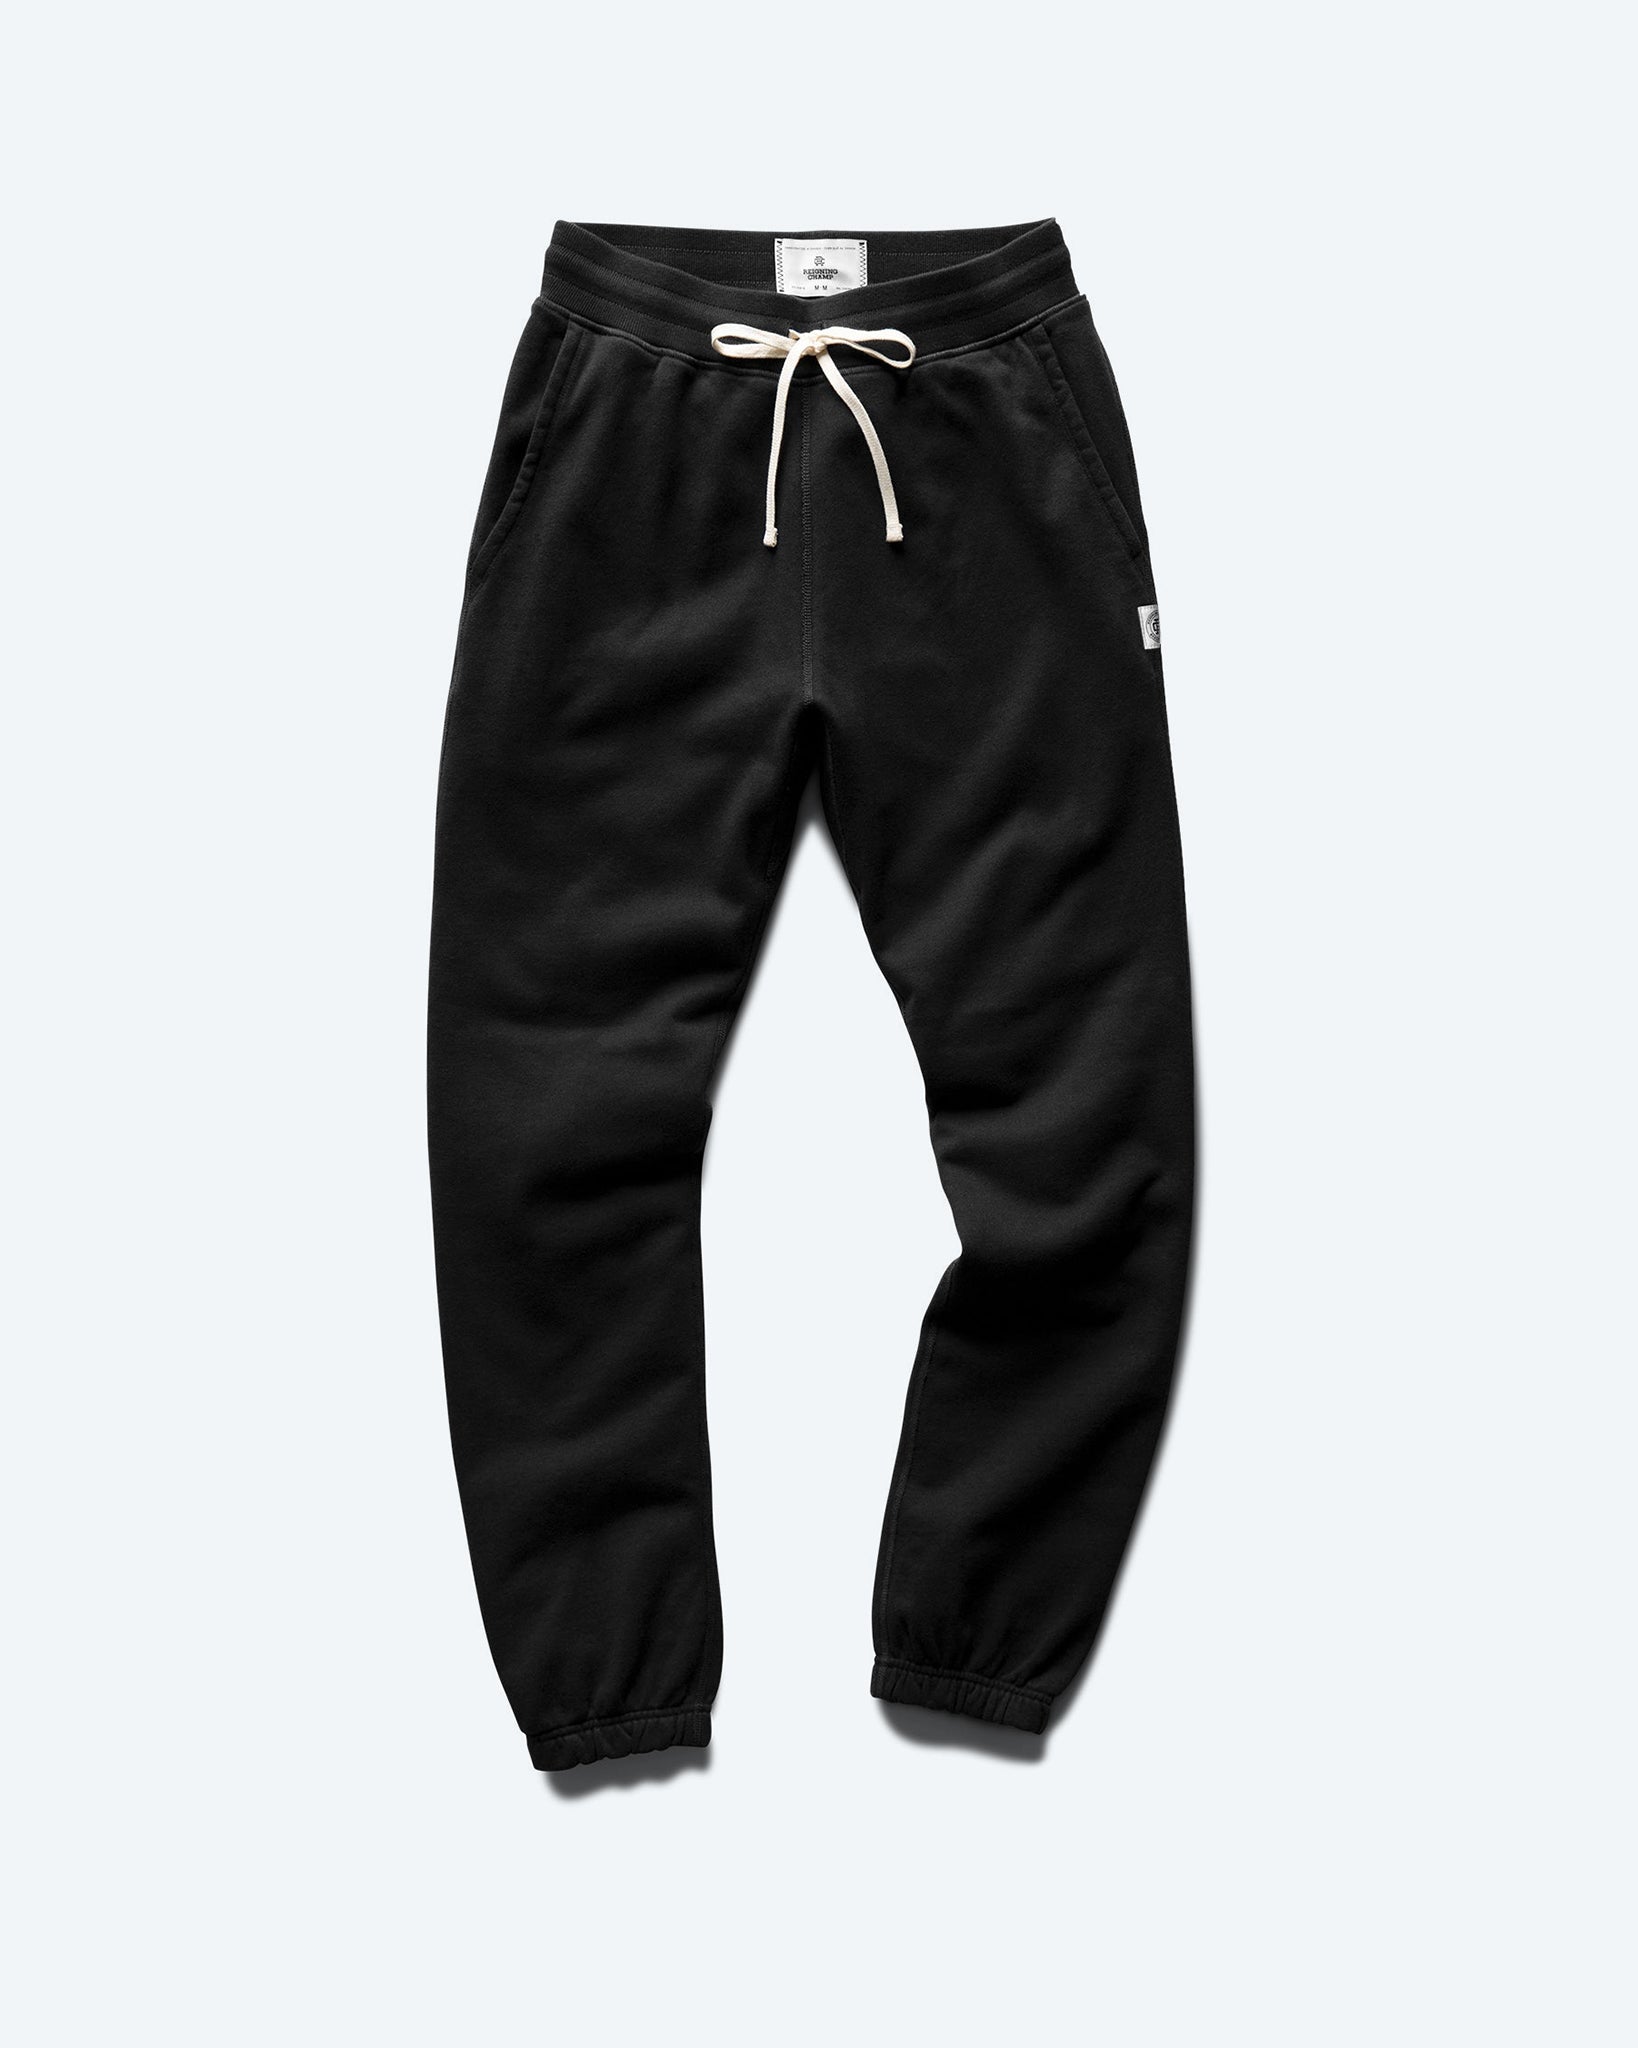 Men's Pants | Sweatpants, Joggers, Chino's & More | Reigning Champ